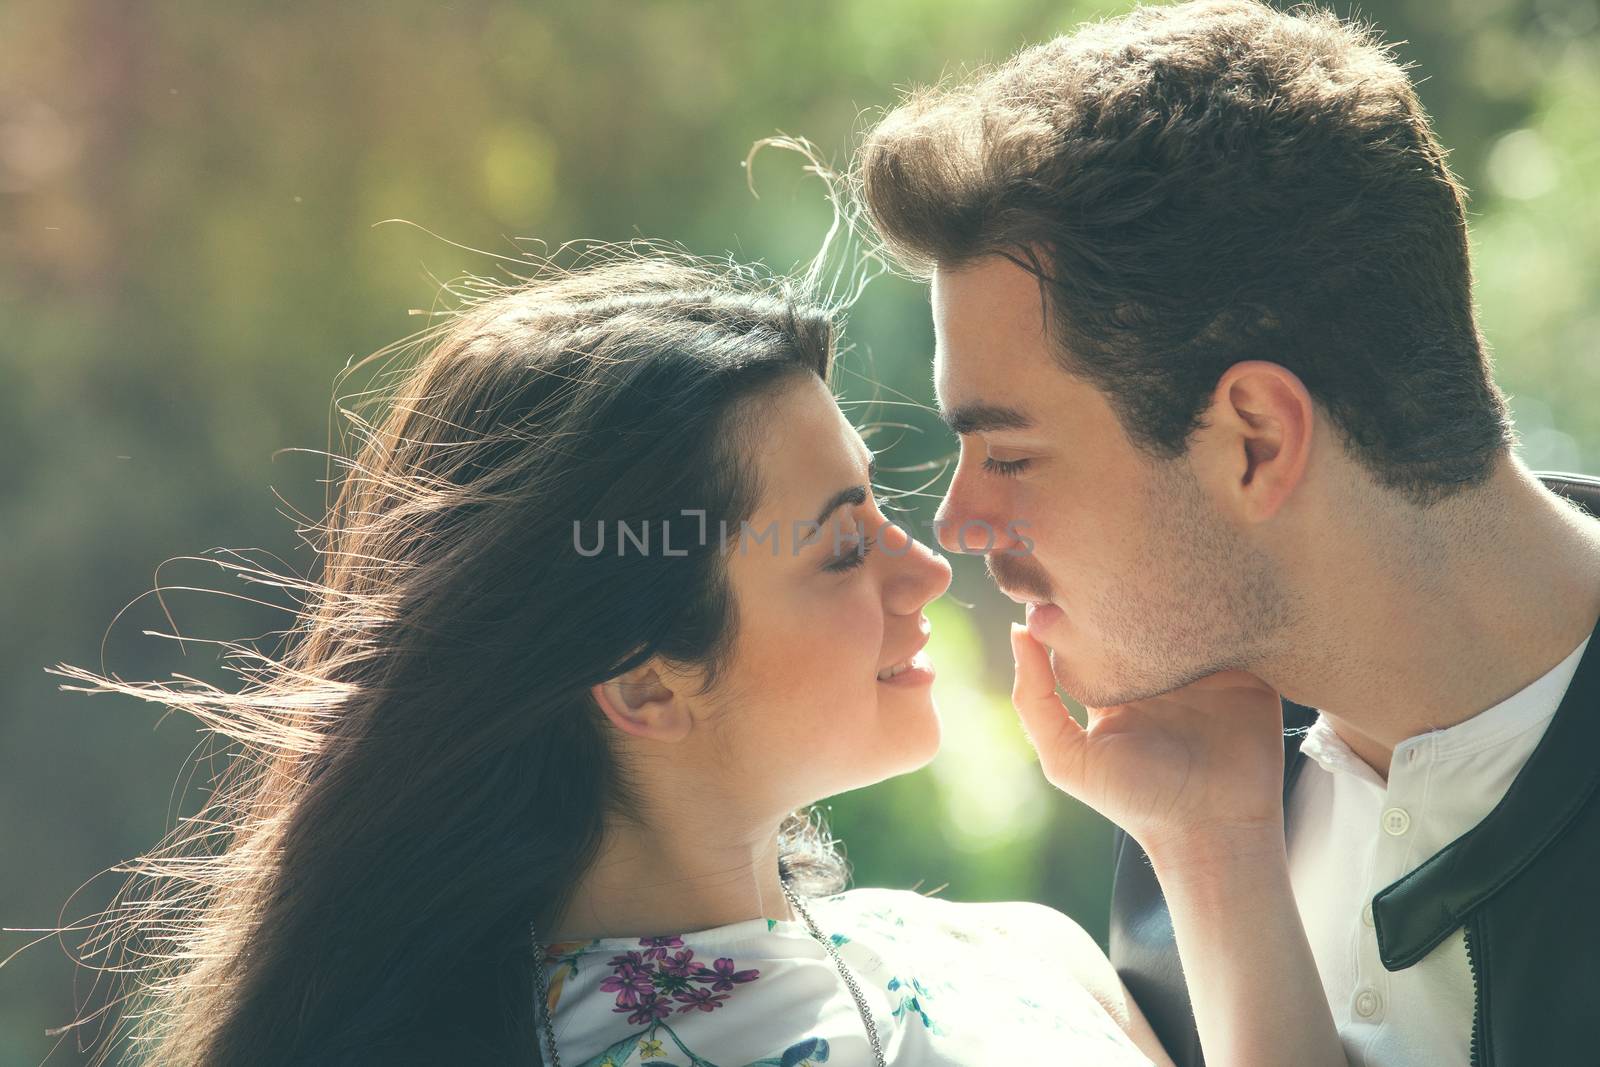 Young couple loving outdoors in a park. A young man and young woman embracing e kissing with passion and feeling. Love and falling in love. Black and white